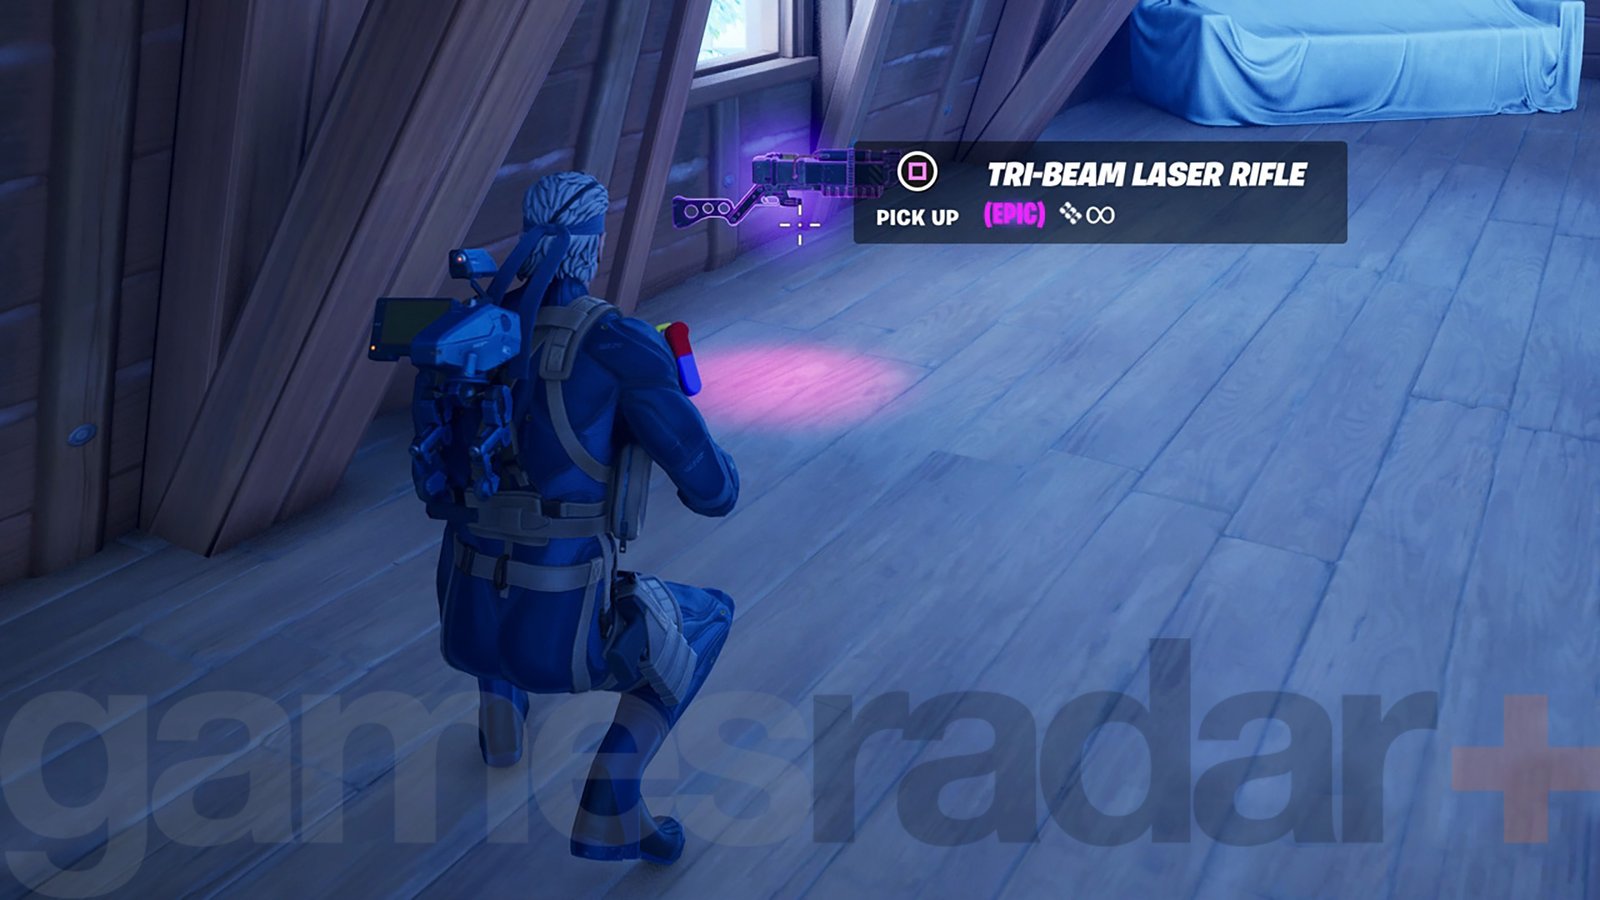 Finding a Fortnite Tri-Beam Laser Rifle as floor loot